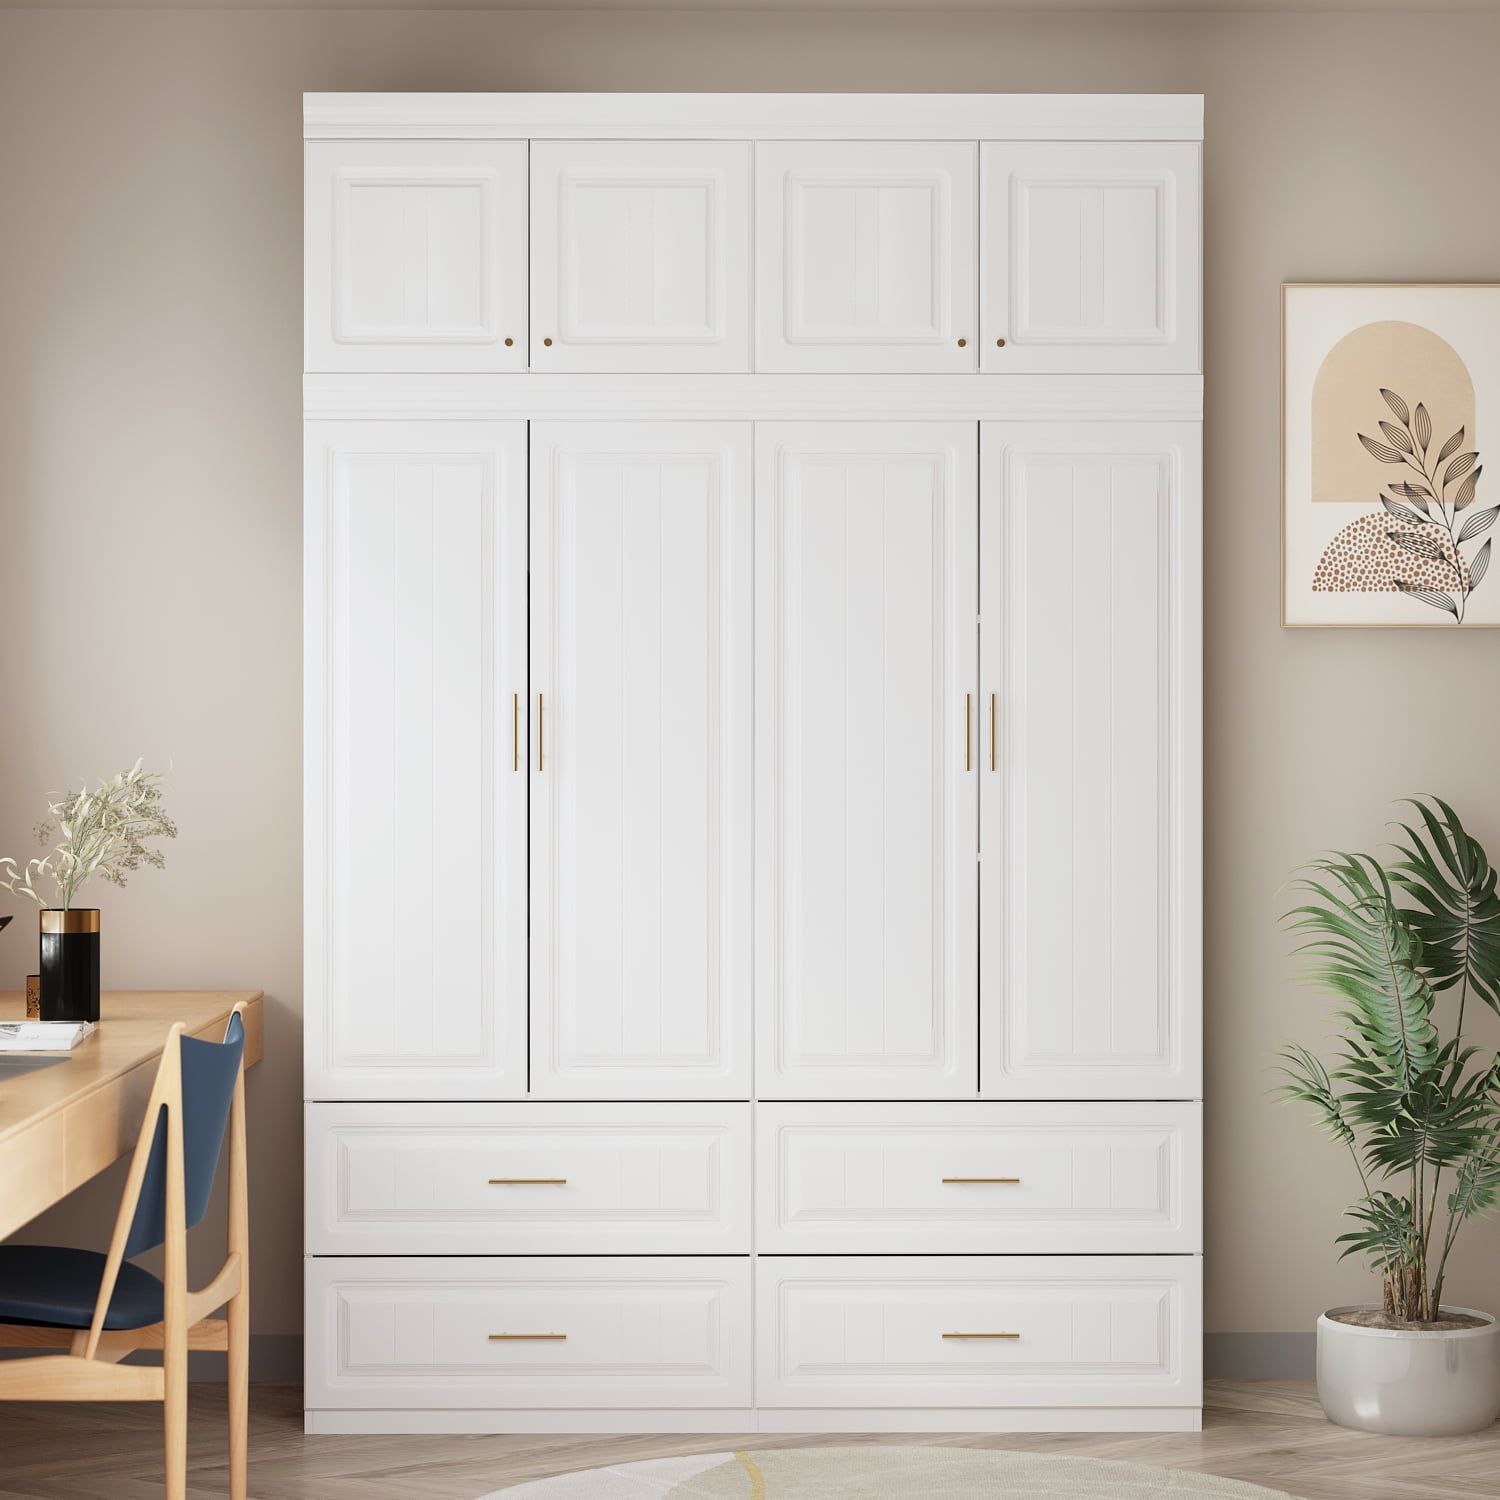 Hitow 4 Door Wardrobe Armoire With Hutch, Shelves And Drawers,white Closet  Storage Cabinet With Clothing Rod For Bedroom, 93.3" H – Walmart Intended For 4 Door White Wardrobes (Photo 7 of 15)